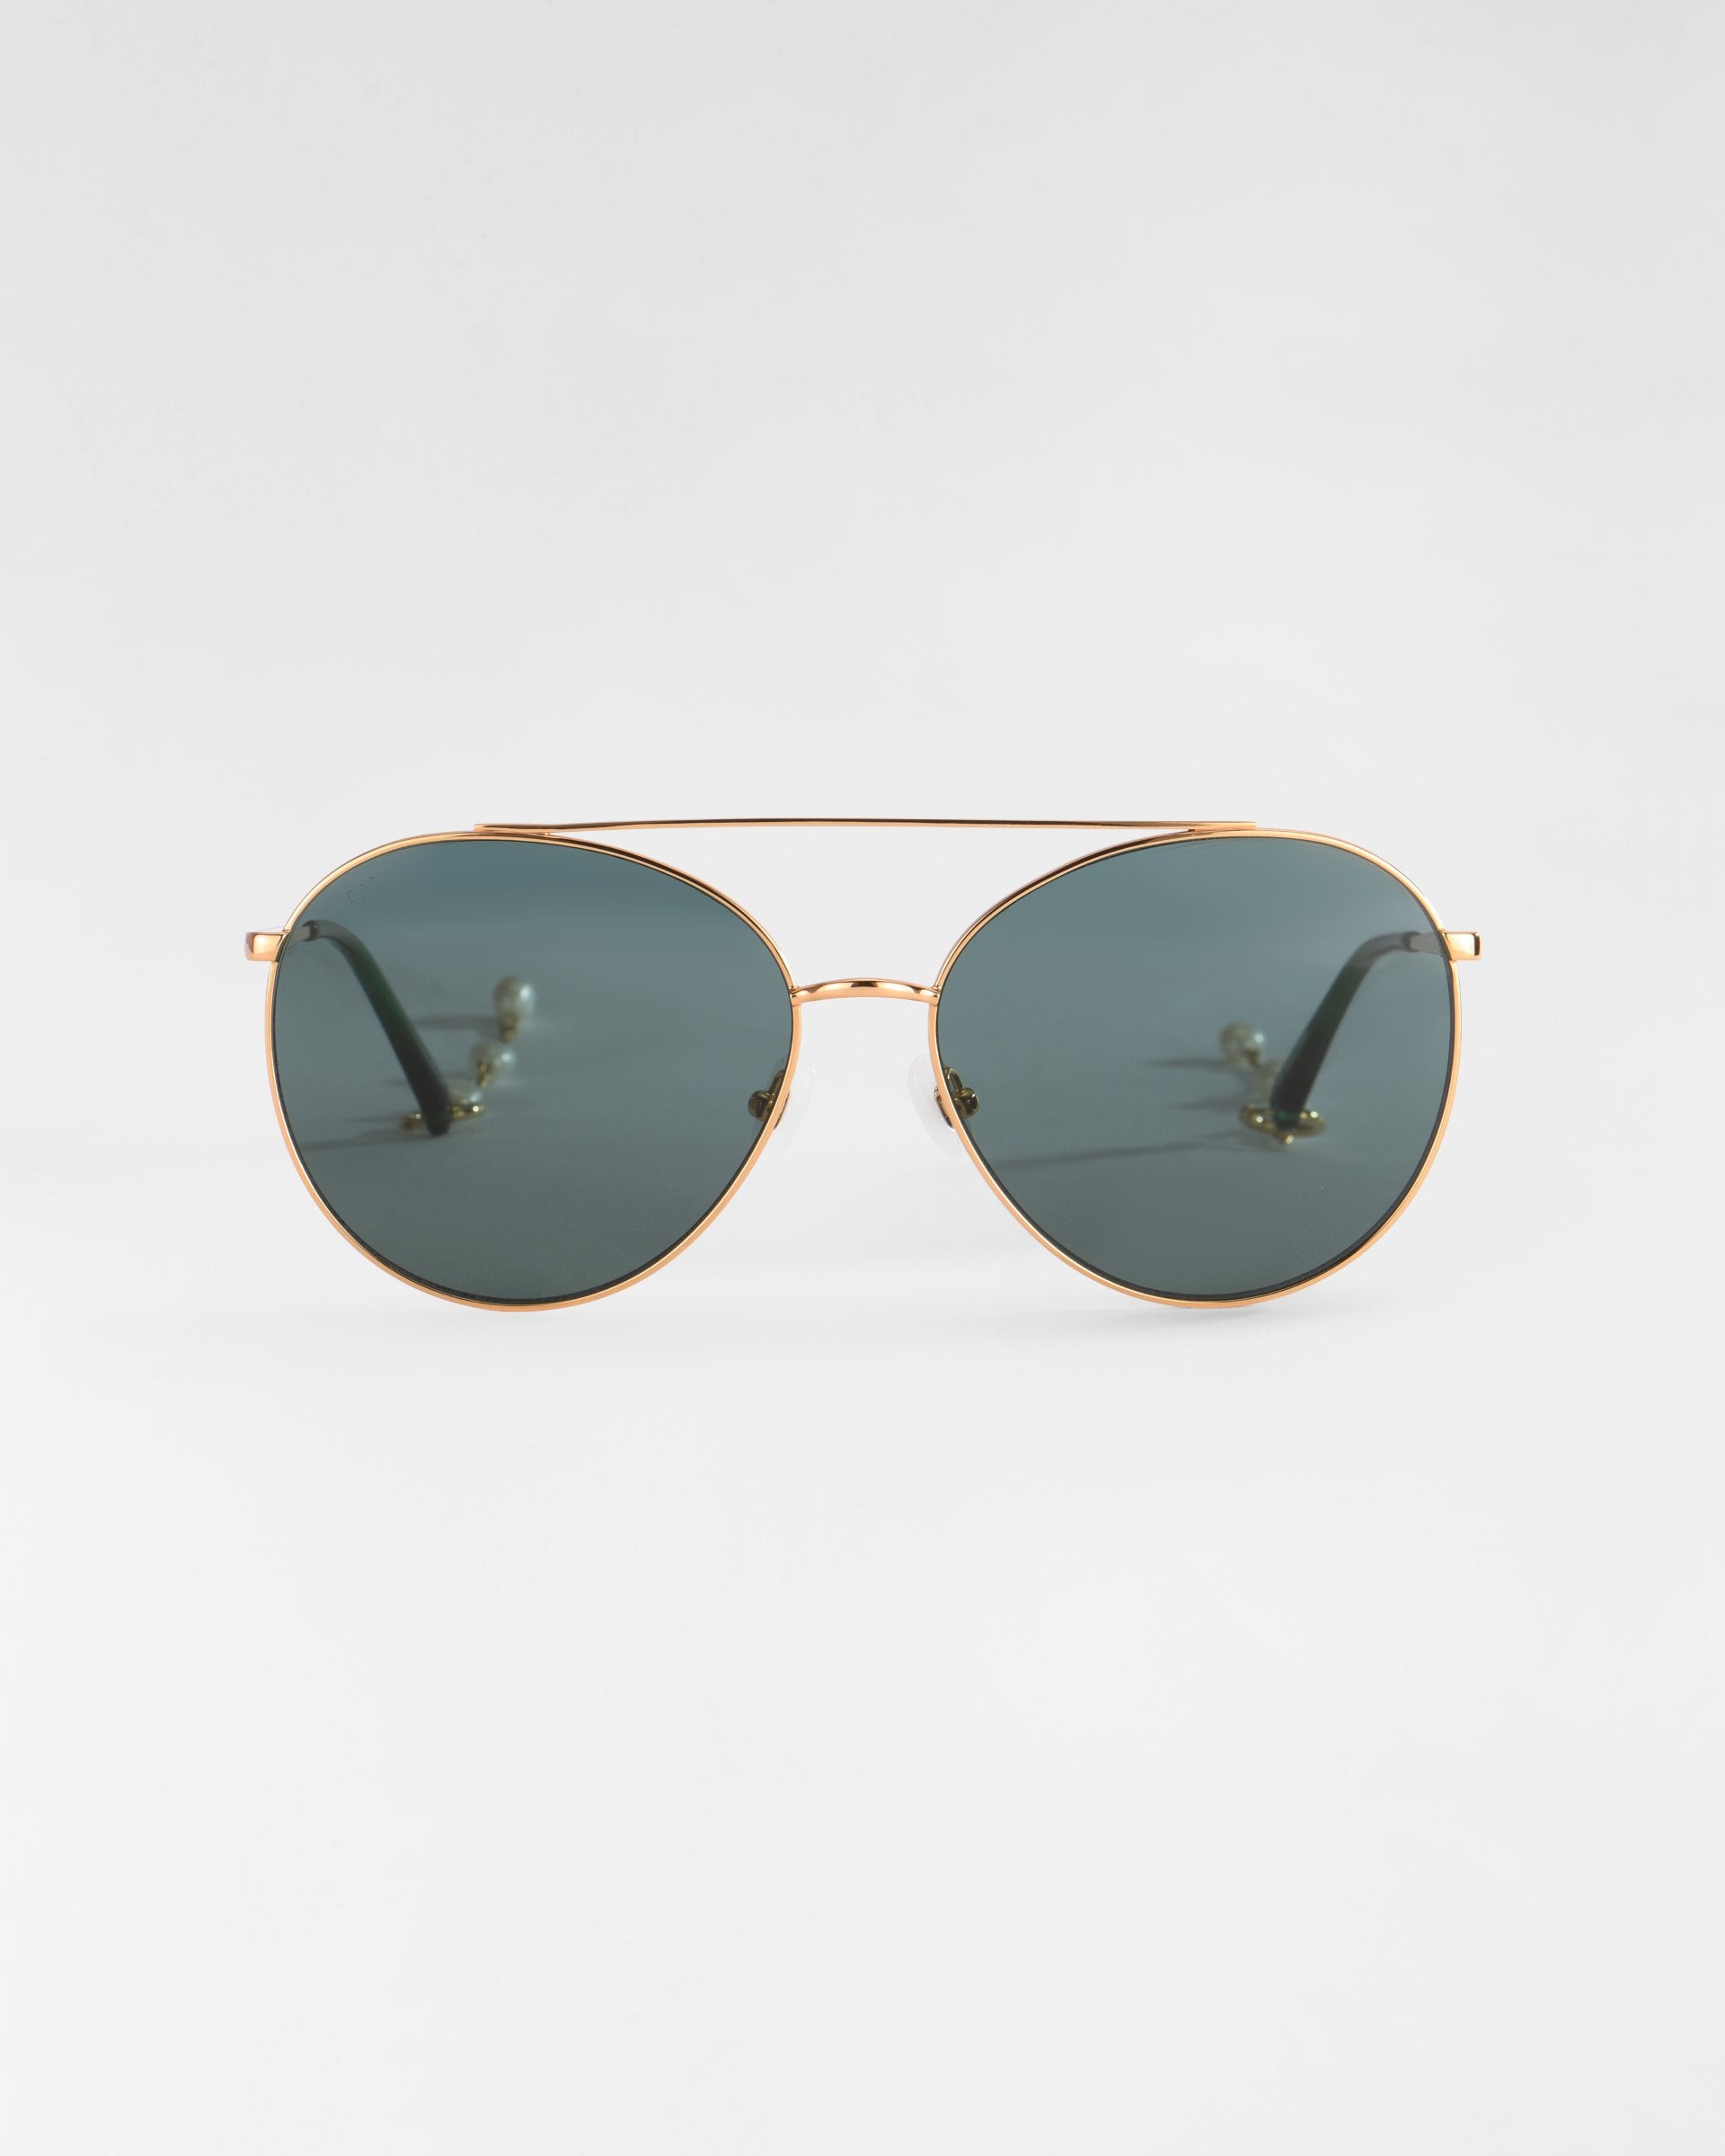 A pair of Yoyo sunglasses by For Art's Sake® with thin, 18k gold-plated frames and dark green lenses is displayed against a plain white background.